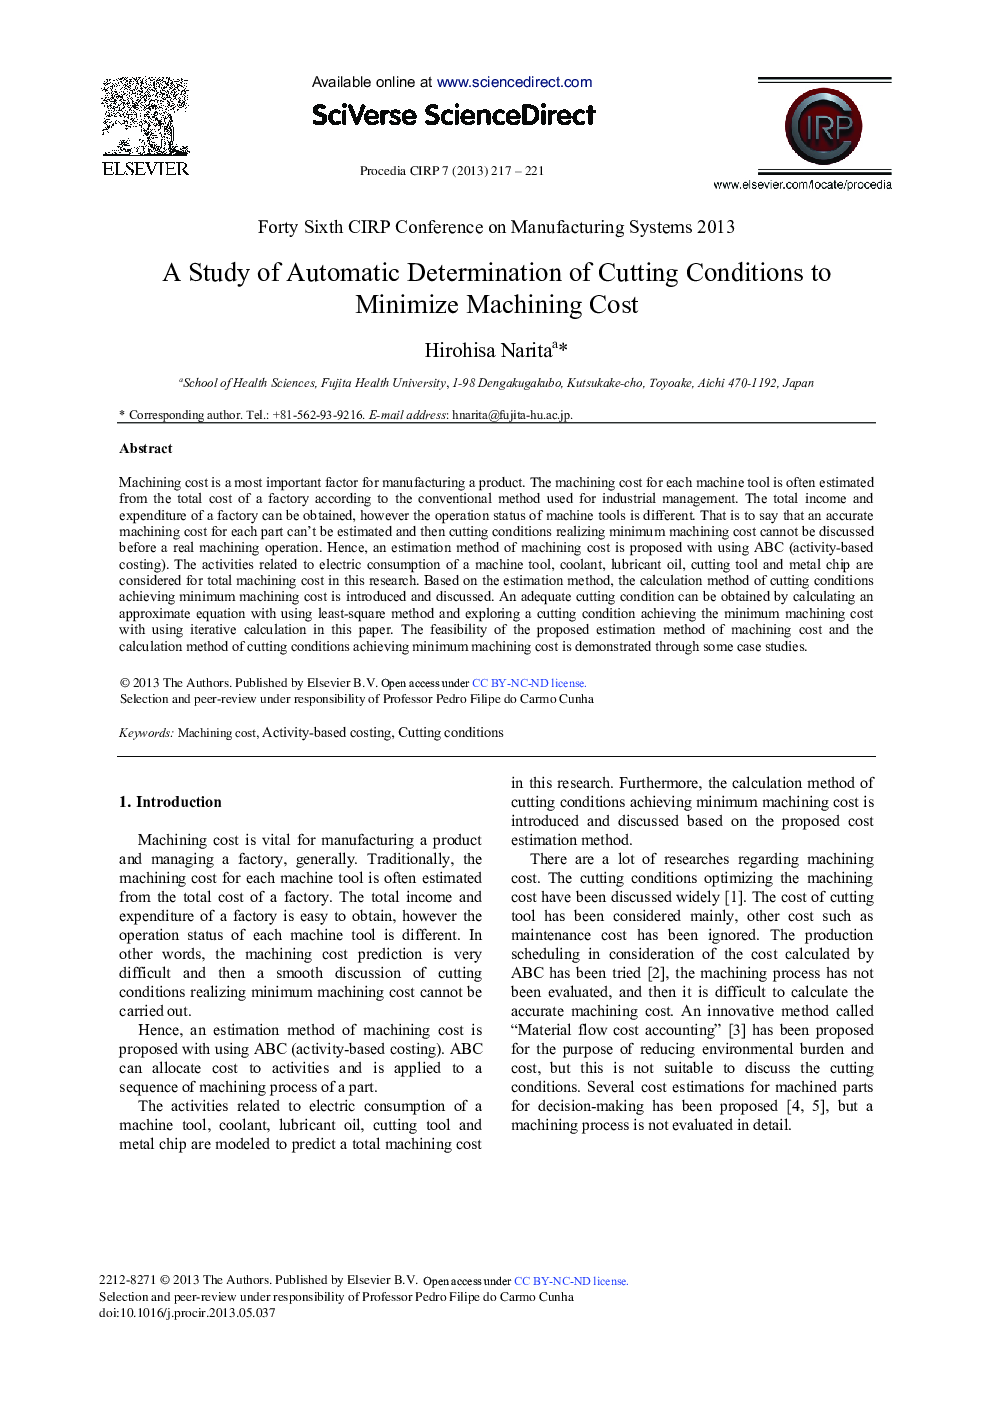 A Study of Automatic Determination of Cutting Conditions to Minimize Machining Cost 